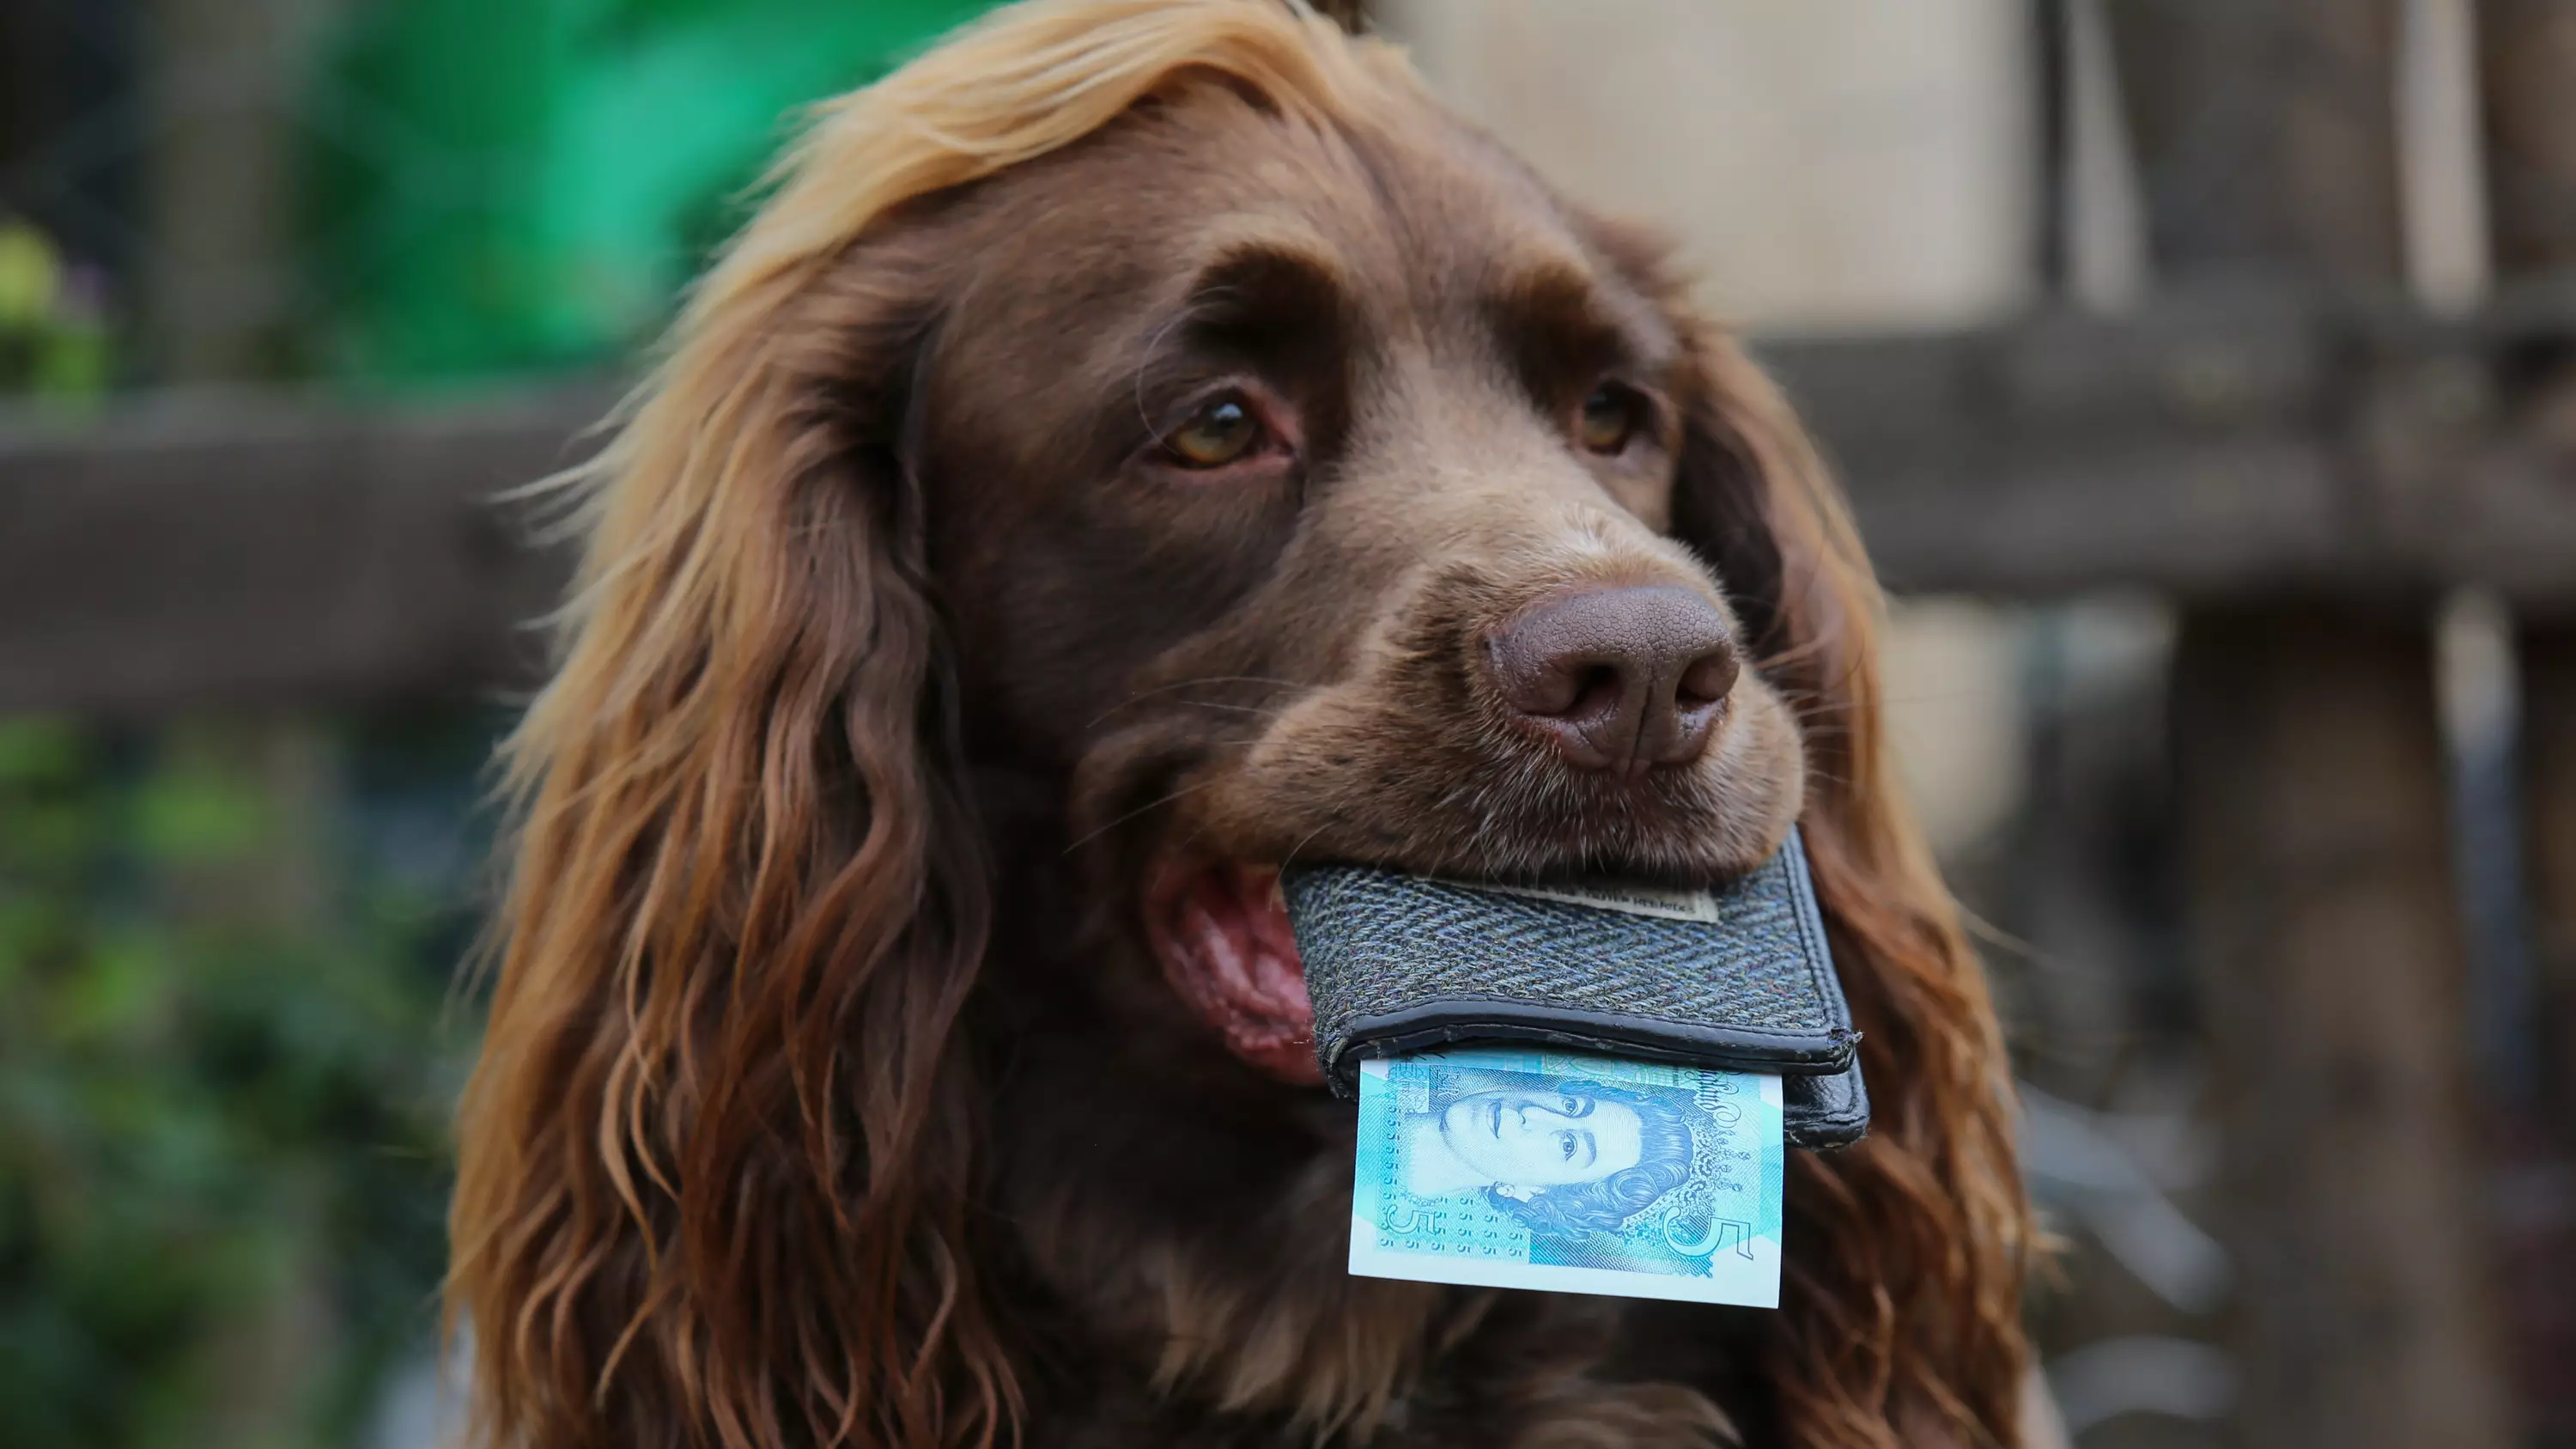 Dog Receives Weekly £5 Pocket Money Allowance From Owner